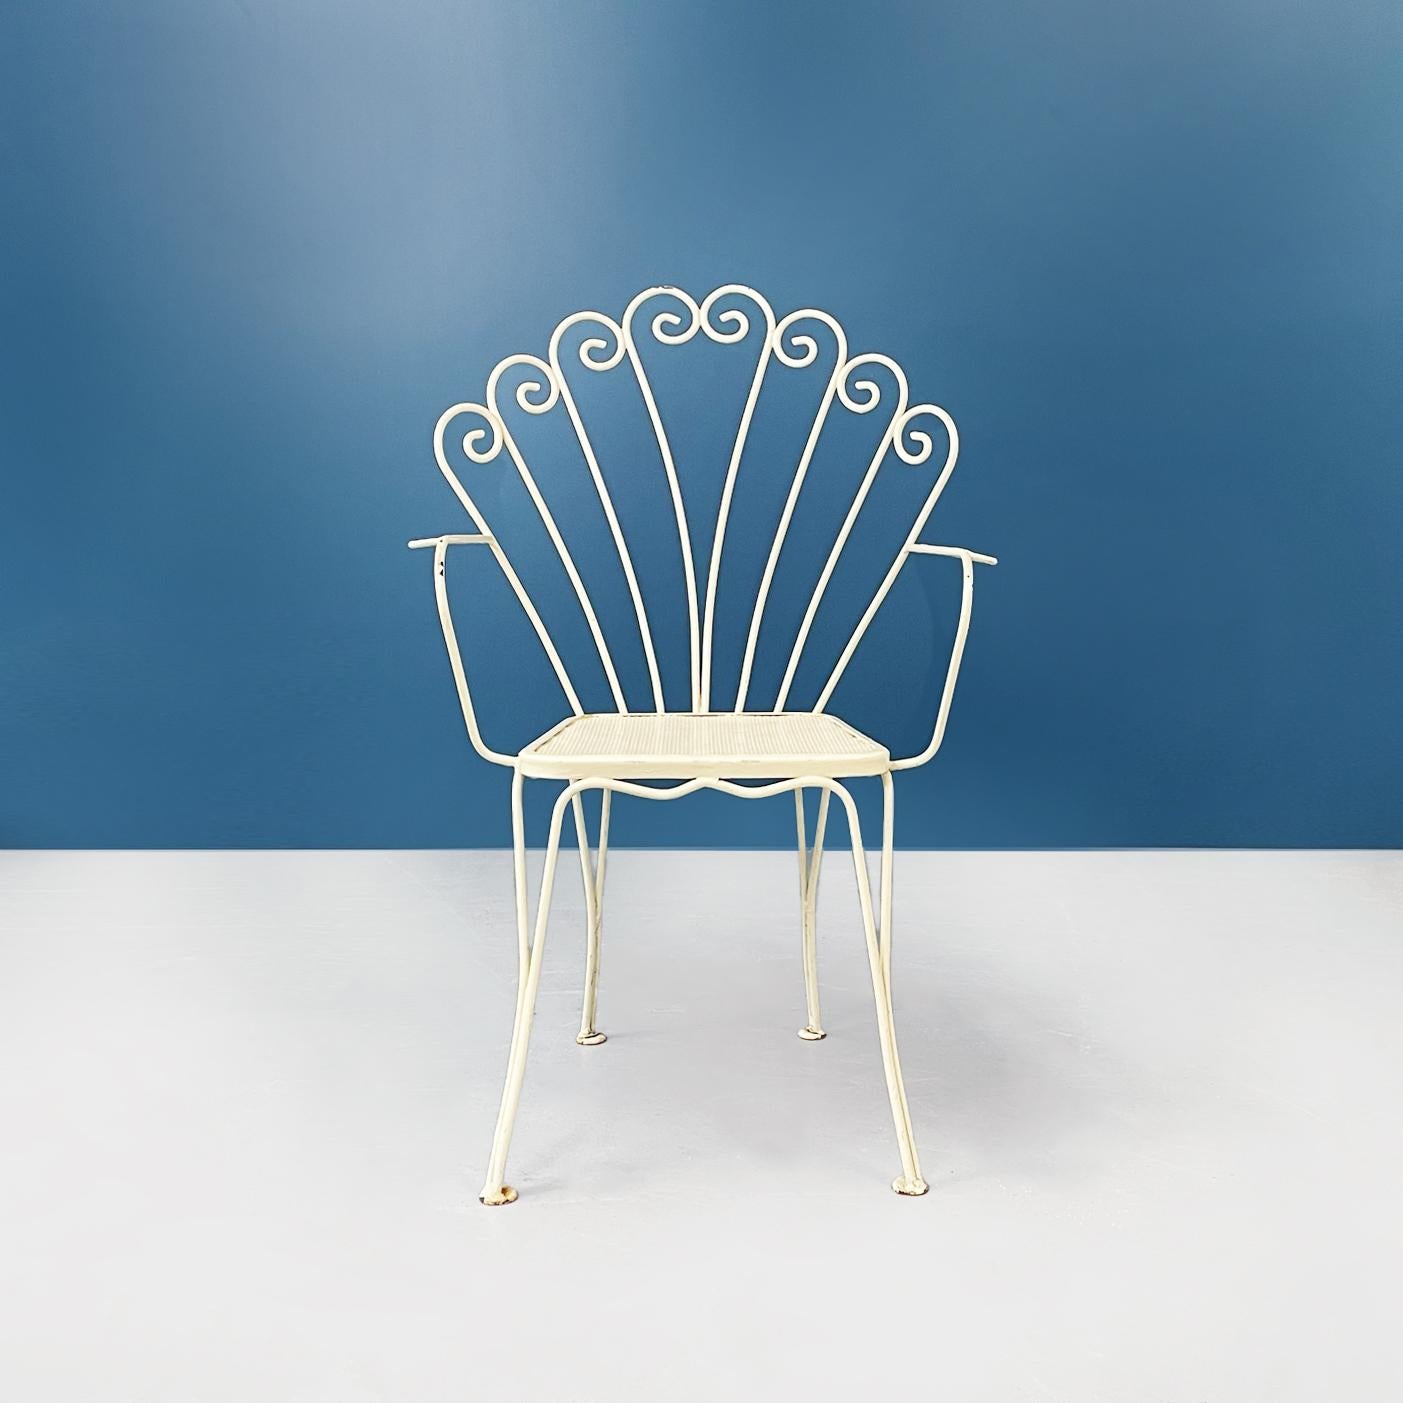 Italian Mid-Century Modern Garden chairs in white wrought iron, 1960s
Set of 4 garden chairs in cream white painted wrought iron. The perforated seat is square in shape with rounded corners. The back is slightly curved and has decorative curls.